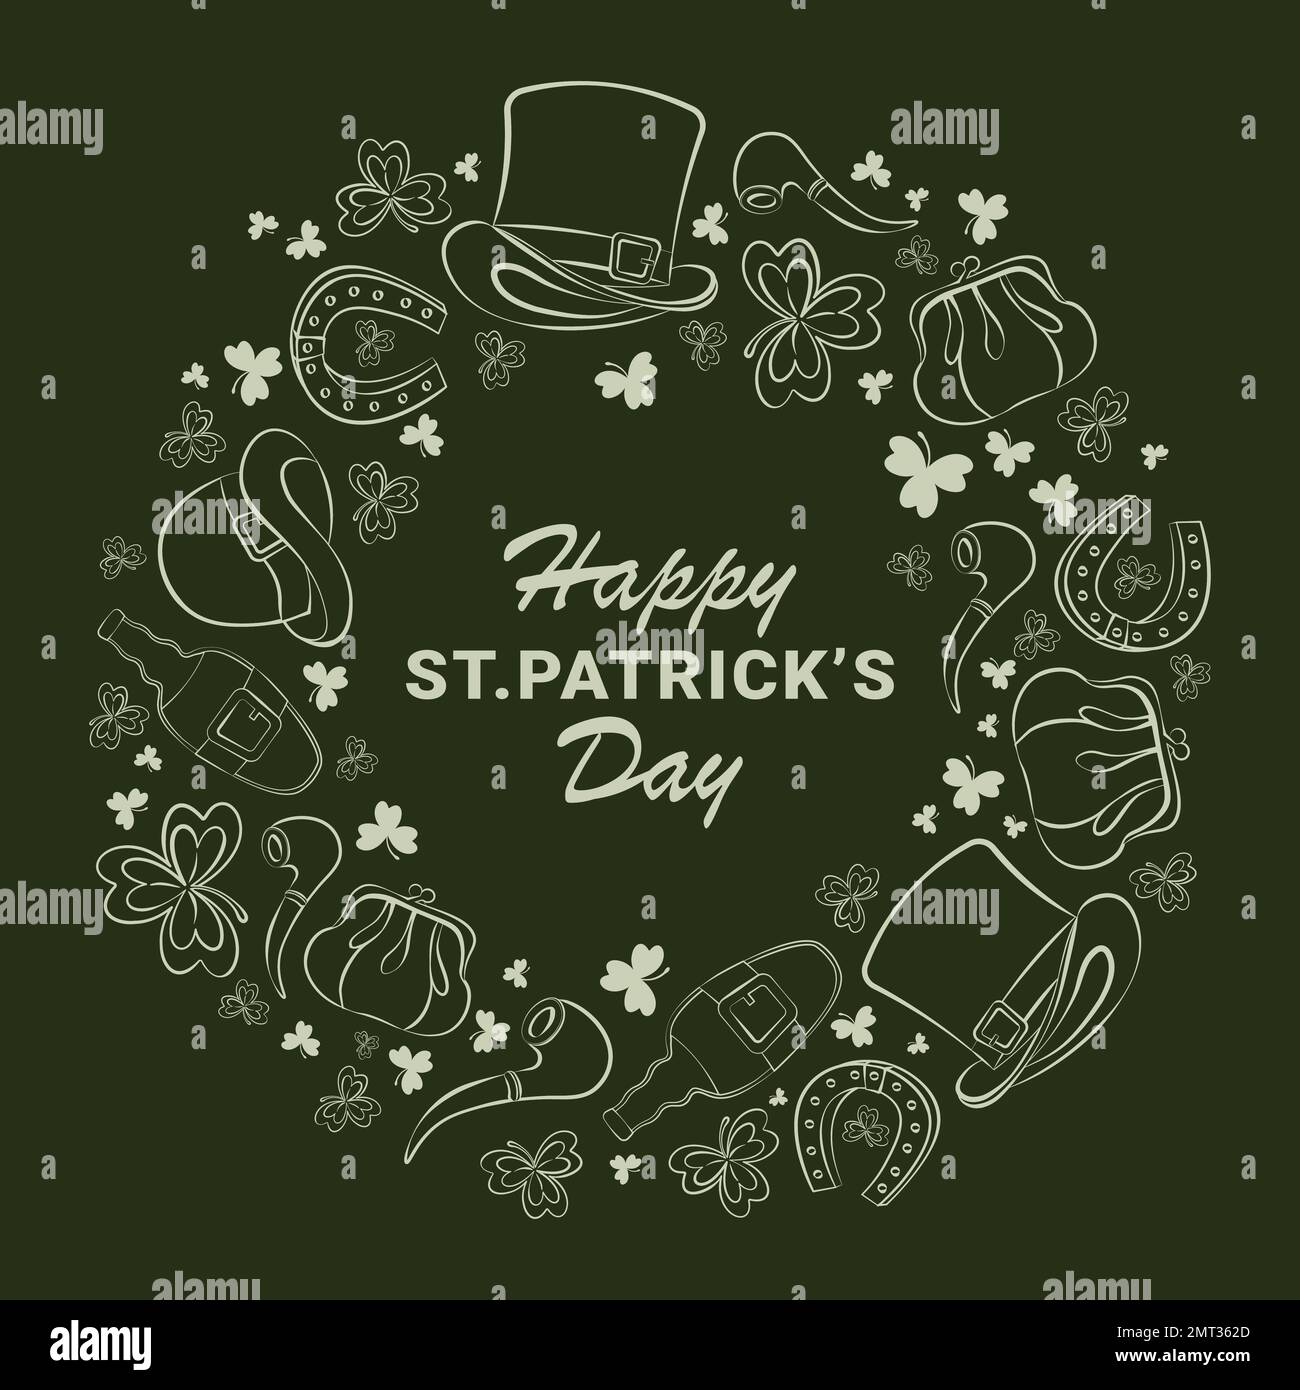 green greeting card with many traditional elements around text about st. patricks day Stock Vector